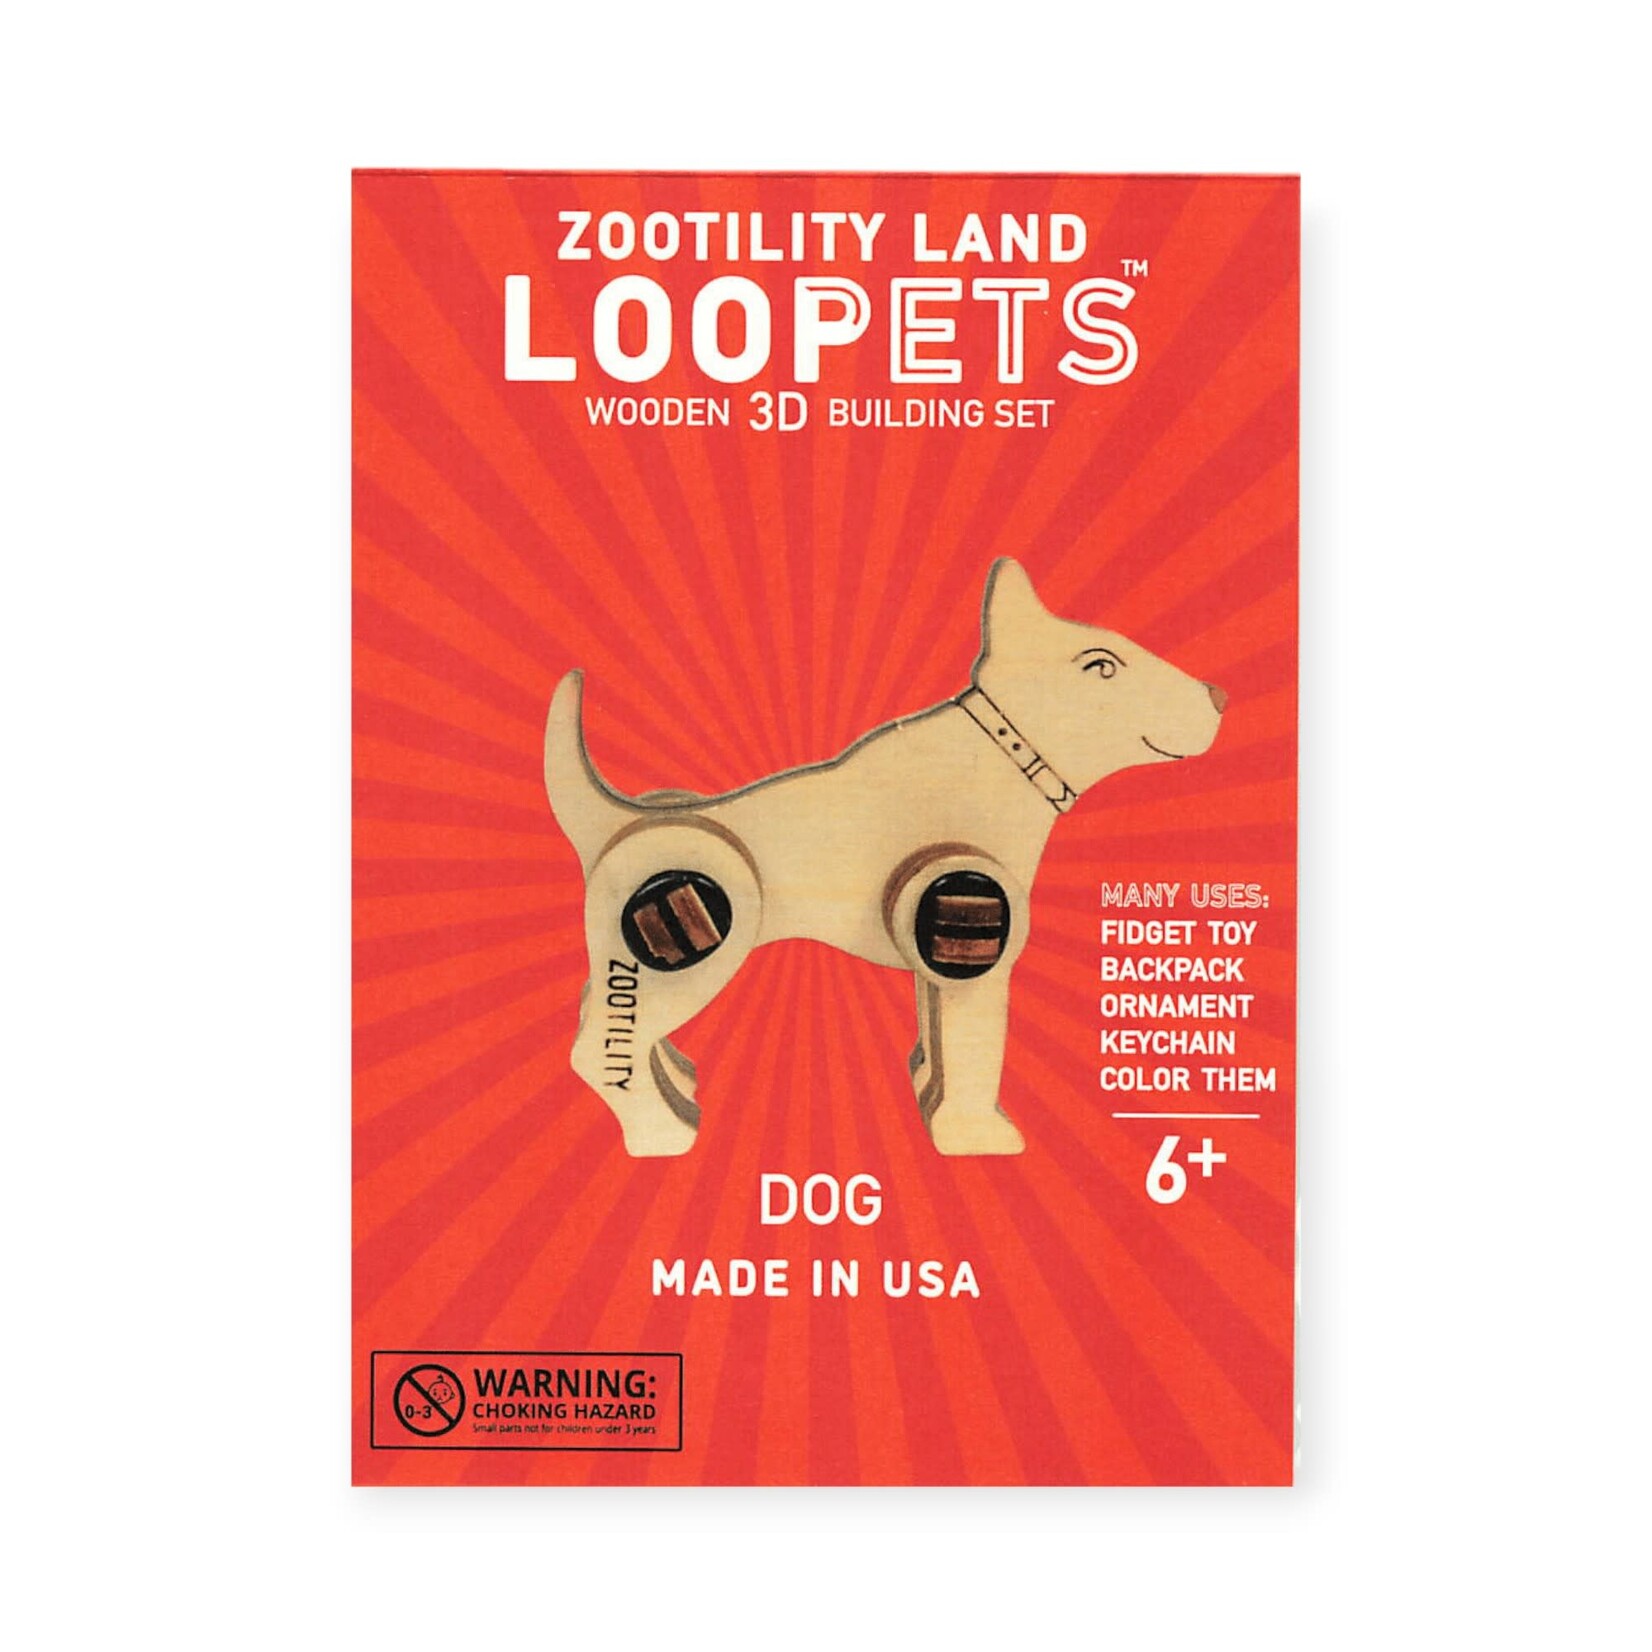 Zootility Tools Loopets 3D Building Set